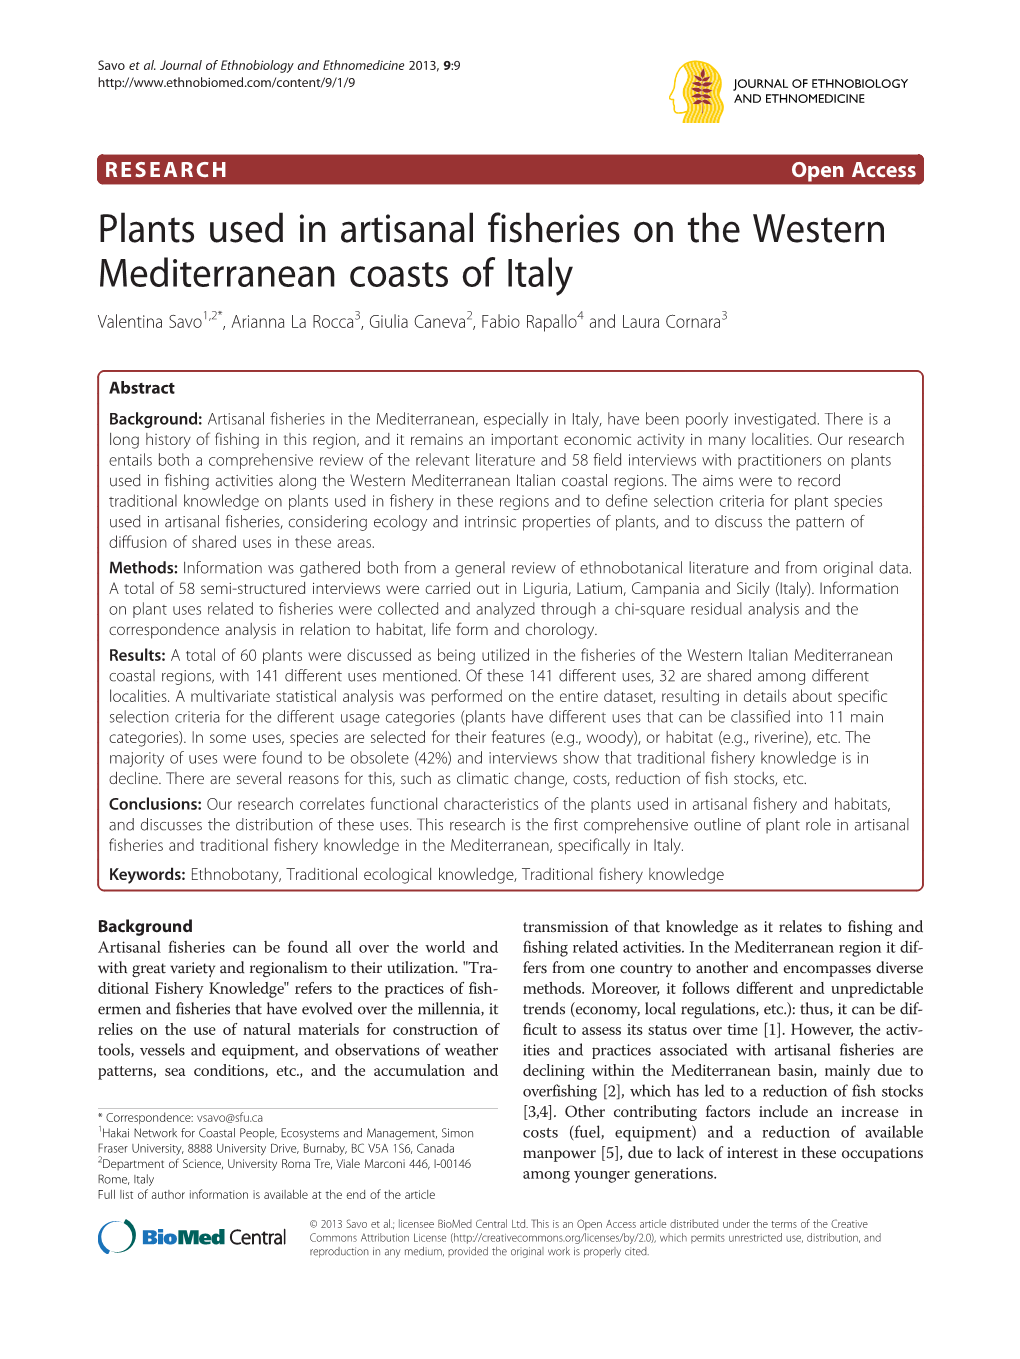 Plants Used in Artisanal Fisheries on the Western Mediterranean Coasts